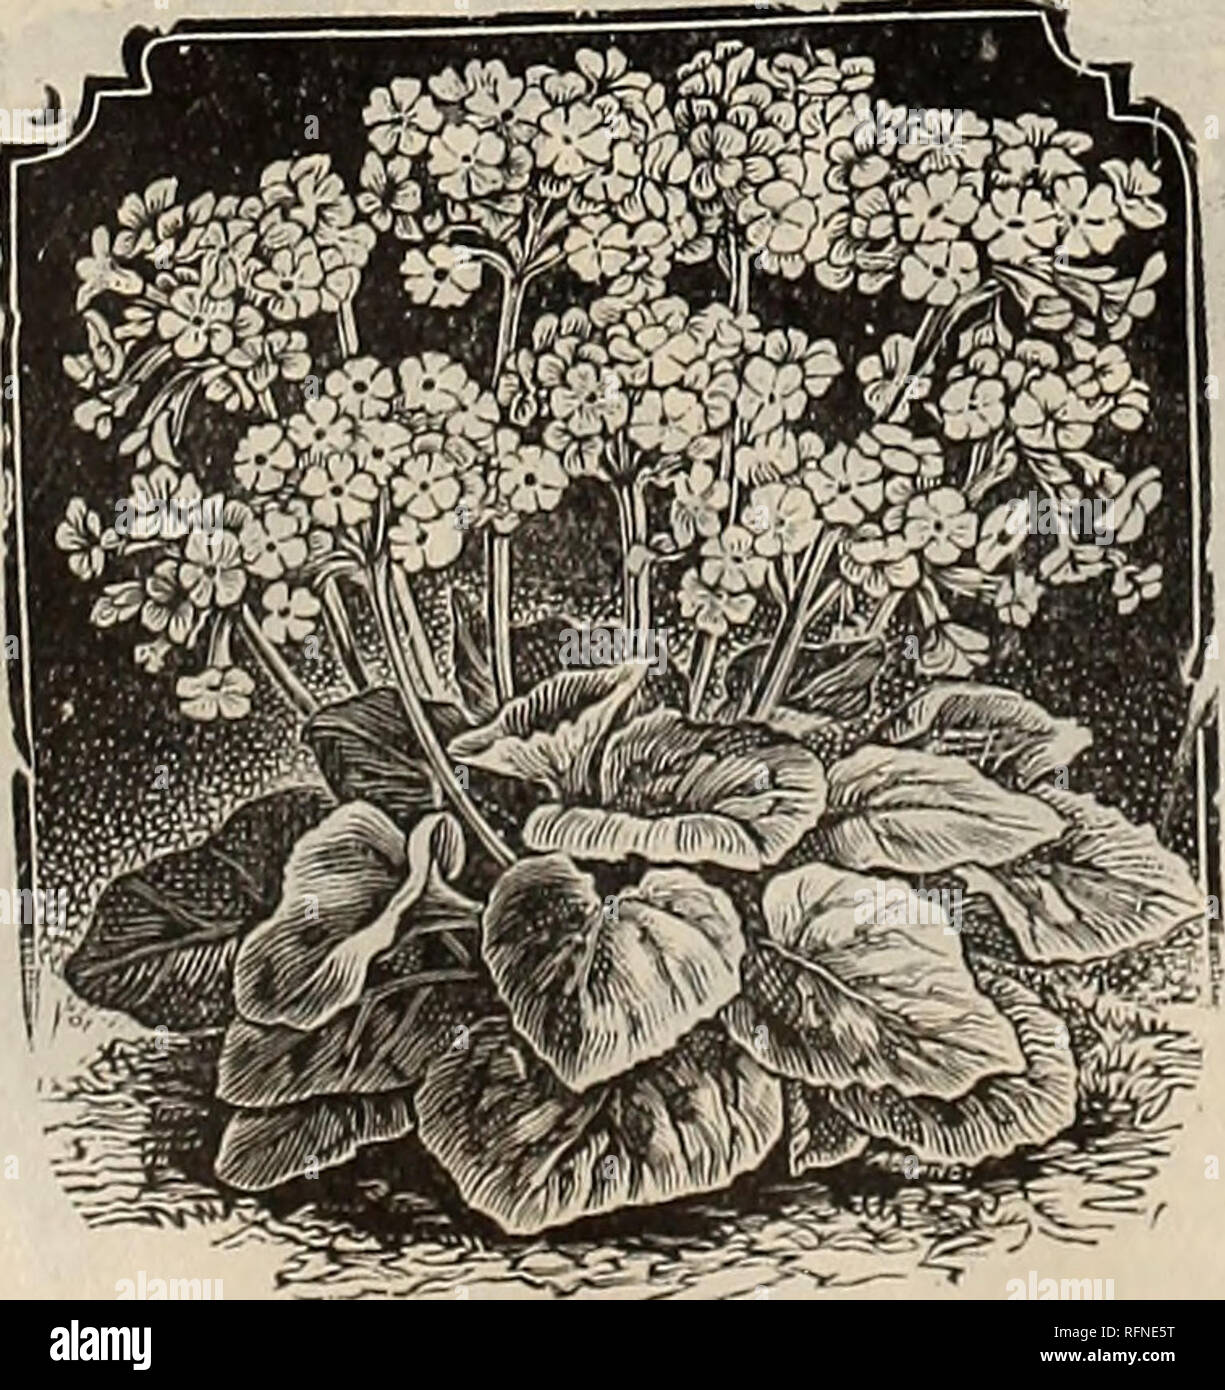 . Illustrated catalogue of plants, bulbs, trees, etc.. Nurseries (Horticulture) Kentucky Louisville Catalogs; Plants, Ornamental Catalogs; Flowers Catalogs; Trees Seedlings Catalogs; Fruit Catalogs. Primula ChineneiB. Pelargoniums. See special collection. Pentstemon Barrata. An excellent herbaceous plant, blooming all summer. 15 cents each. Pilogyne Suavis. A charming climber, very dense grower, very useful for forming growing festoons between small trees or stakes, trees, etc. Also fine for the house in winter. 20 cents, each. Plicatum Grass. (PANICUM PLICATUM.) This is a tropical plant from  Stock Photo